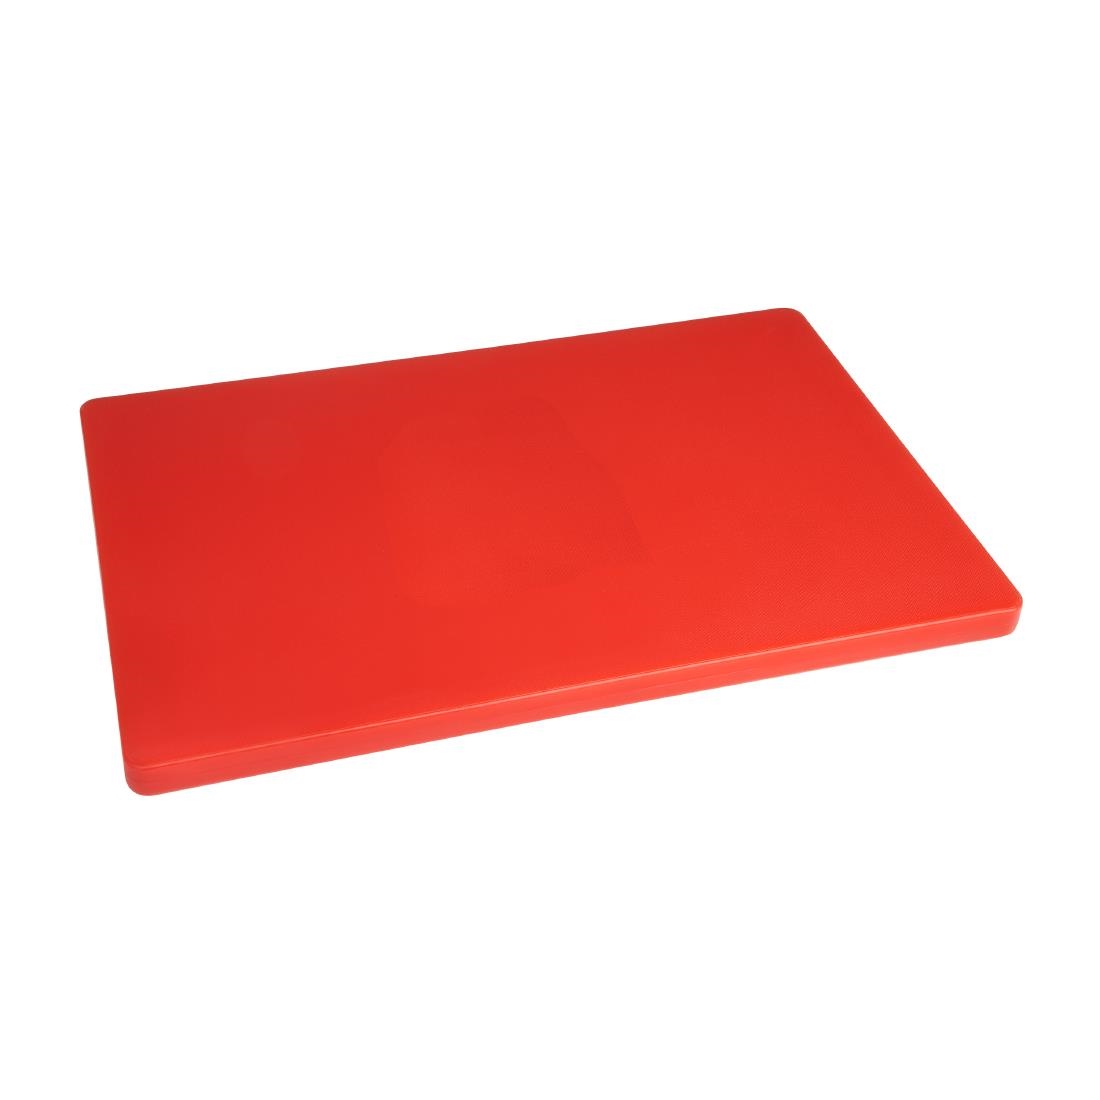 Hygiplas Extra Thick Low Density Red Chopping Board Standard